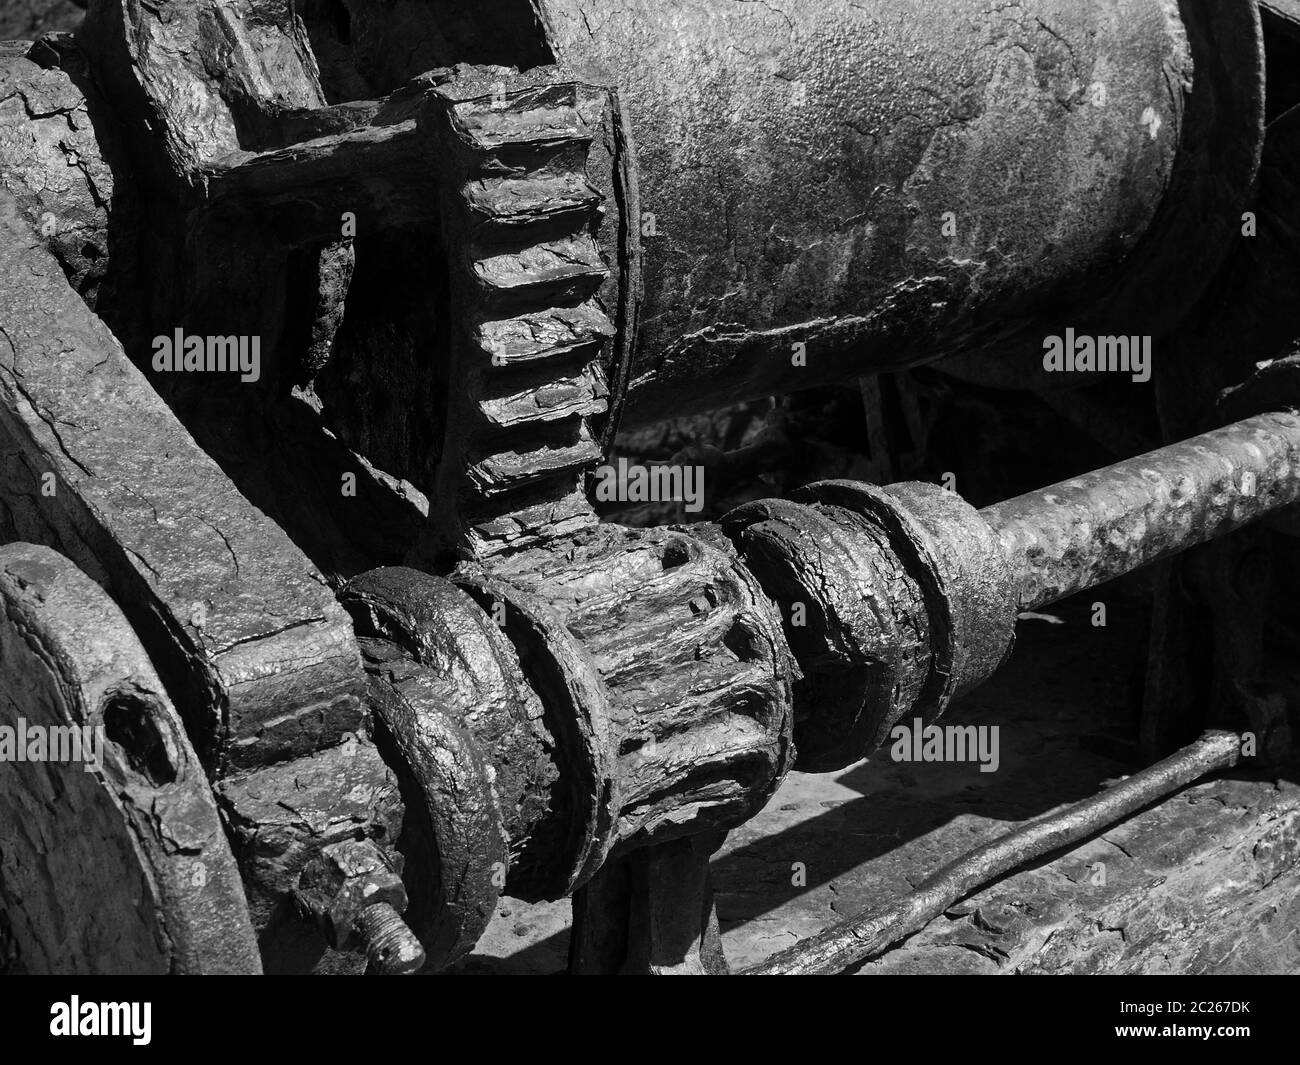 monochrome image of old rusted machinery with corroded cogs and gears Stock Photo